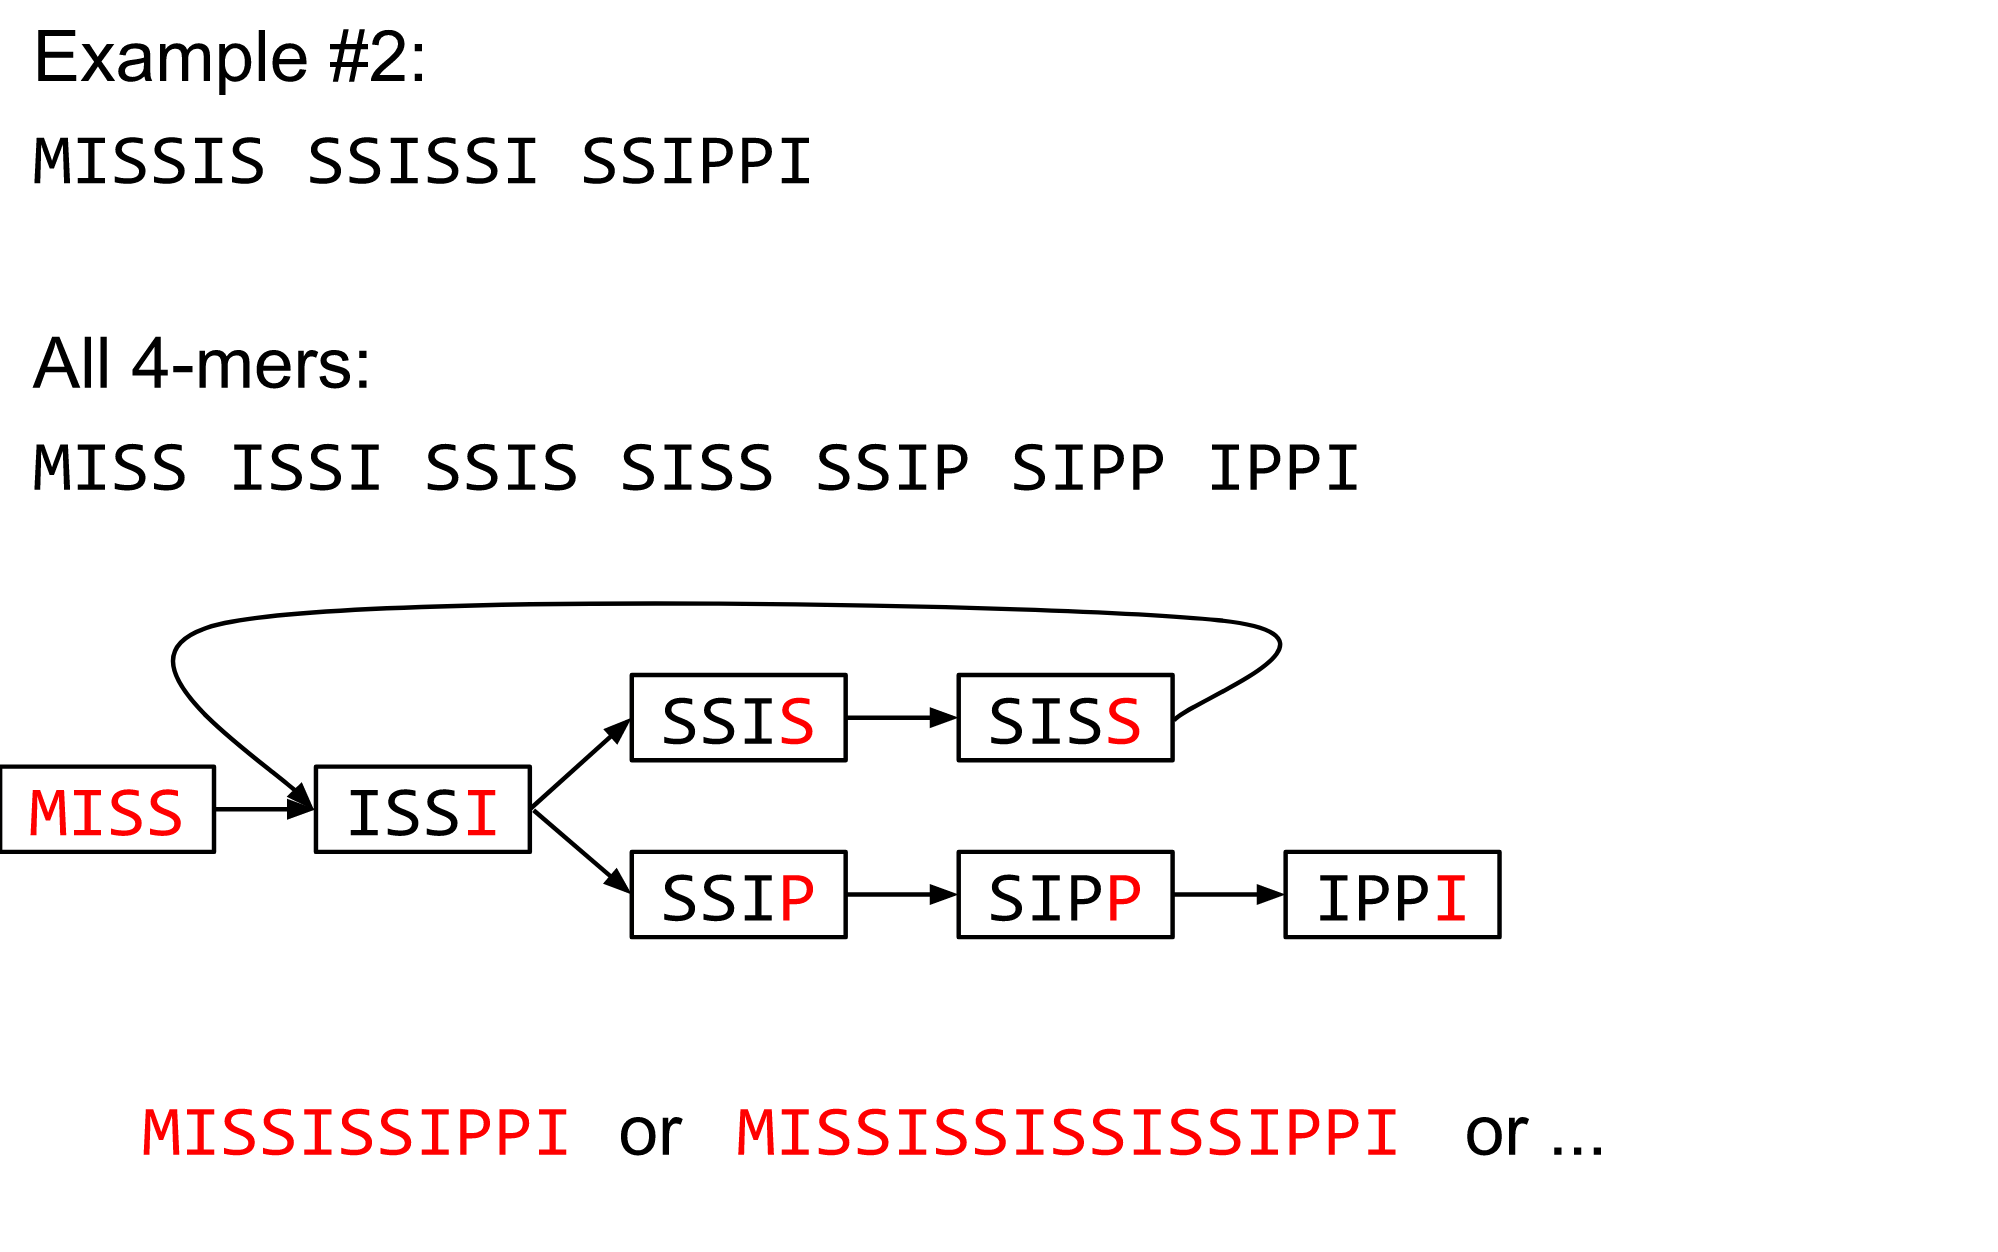 Example with a word containing repeats: Mississippi